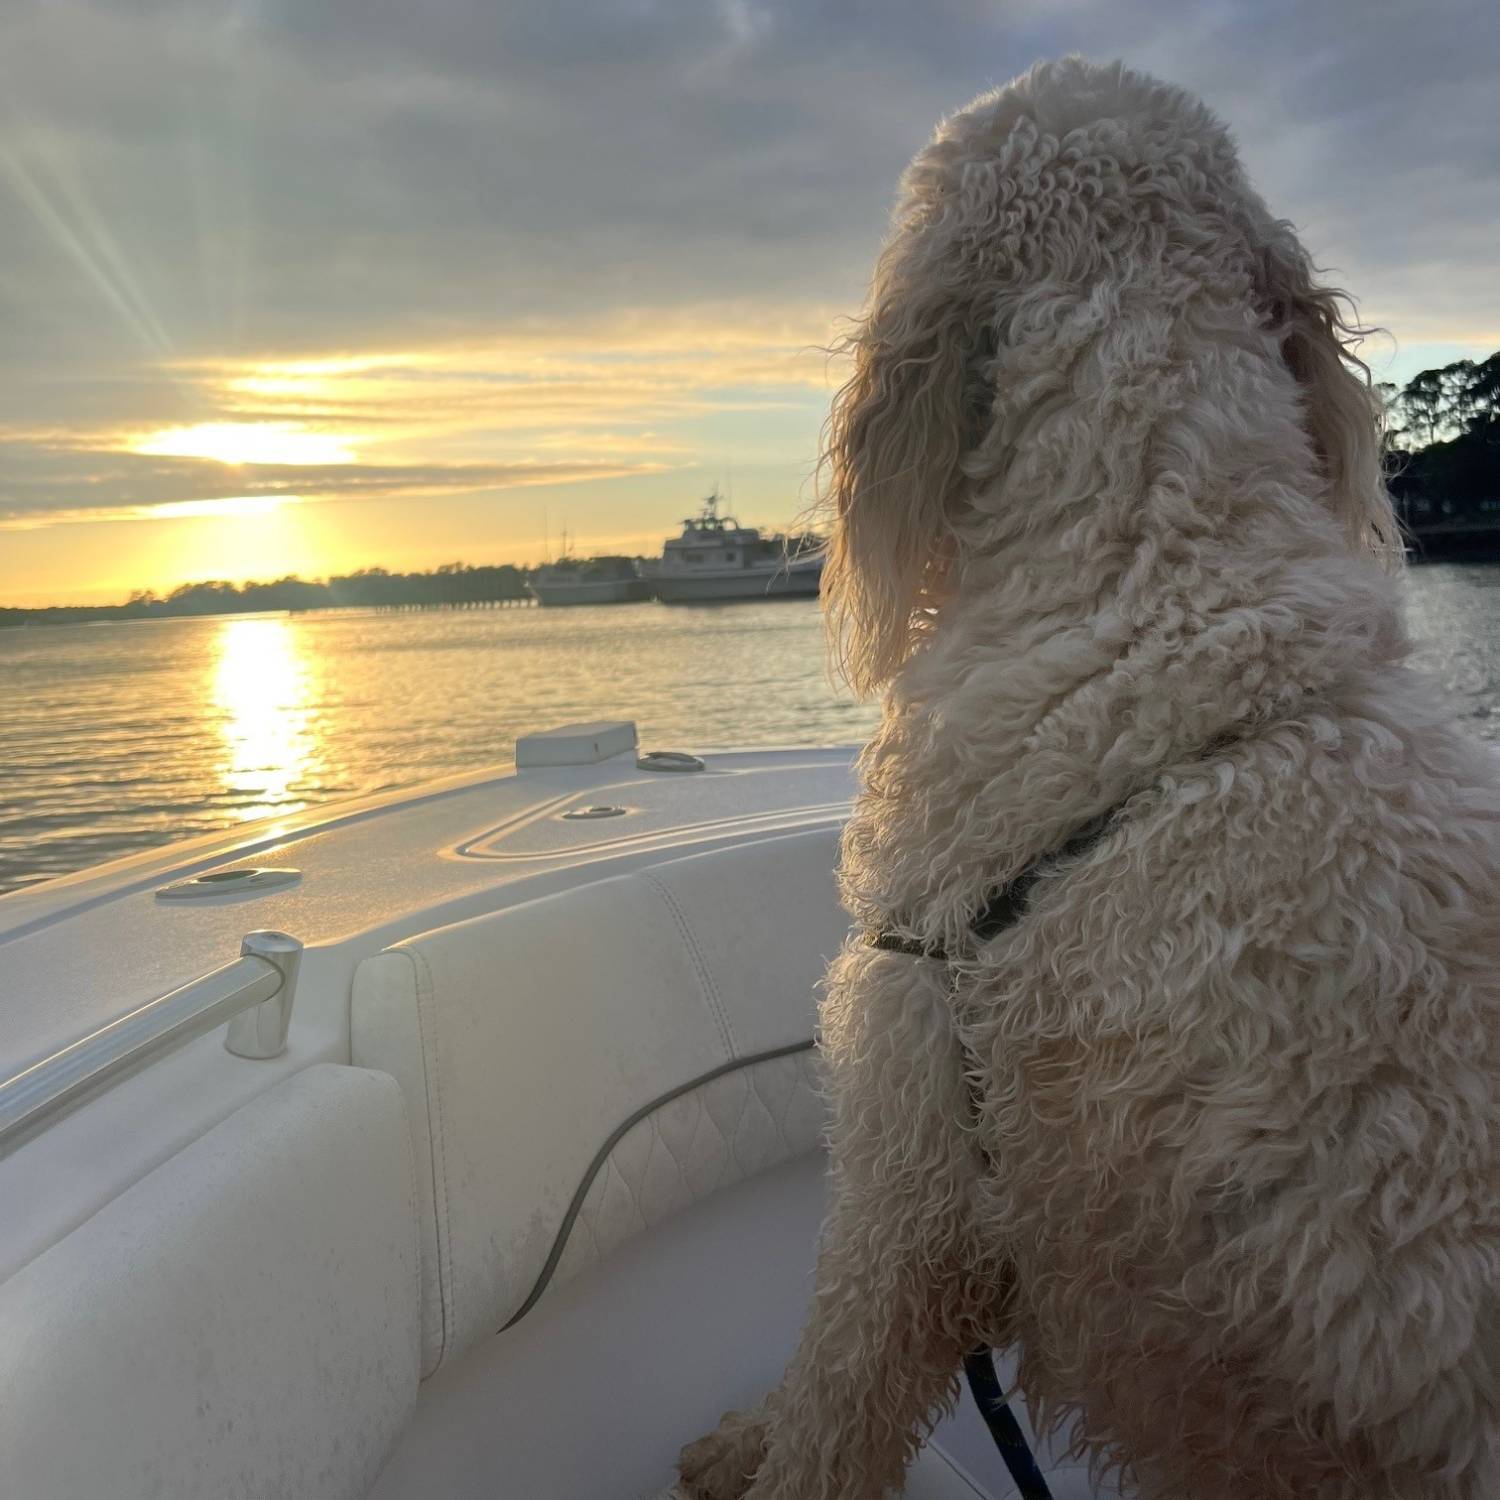 On the way in from the Sandbar, our dog Charlie (Australian Goldendoodle) got up on the Bow to check out...